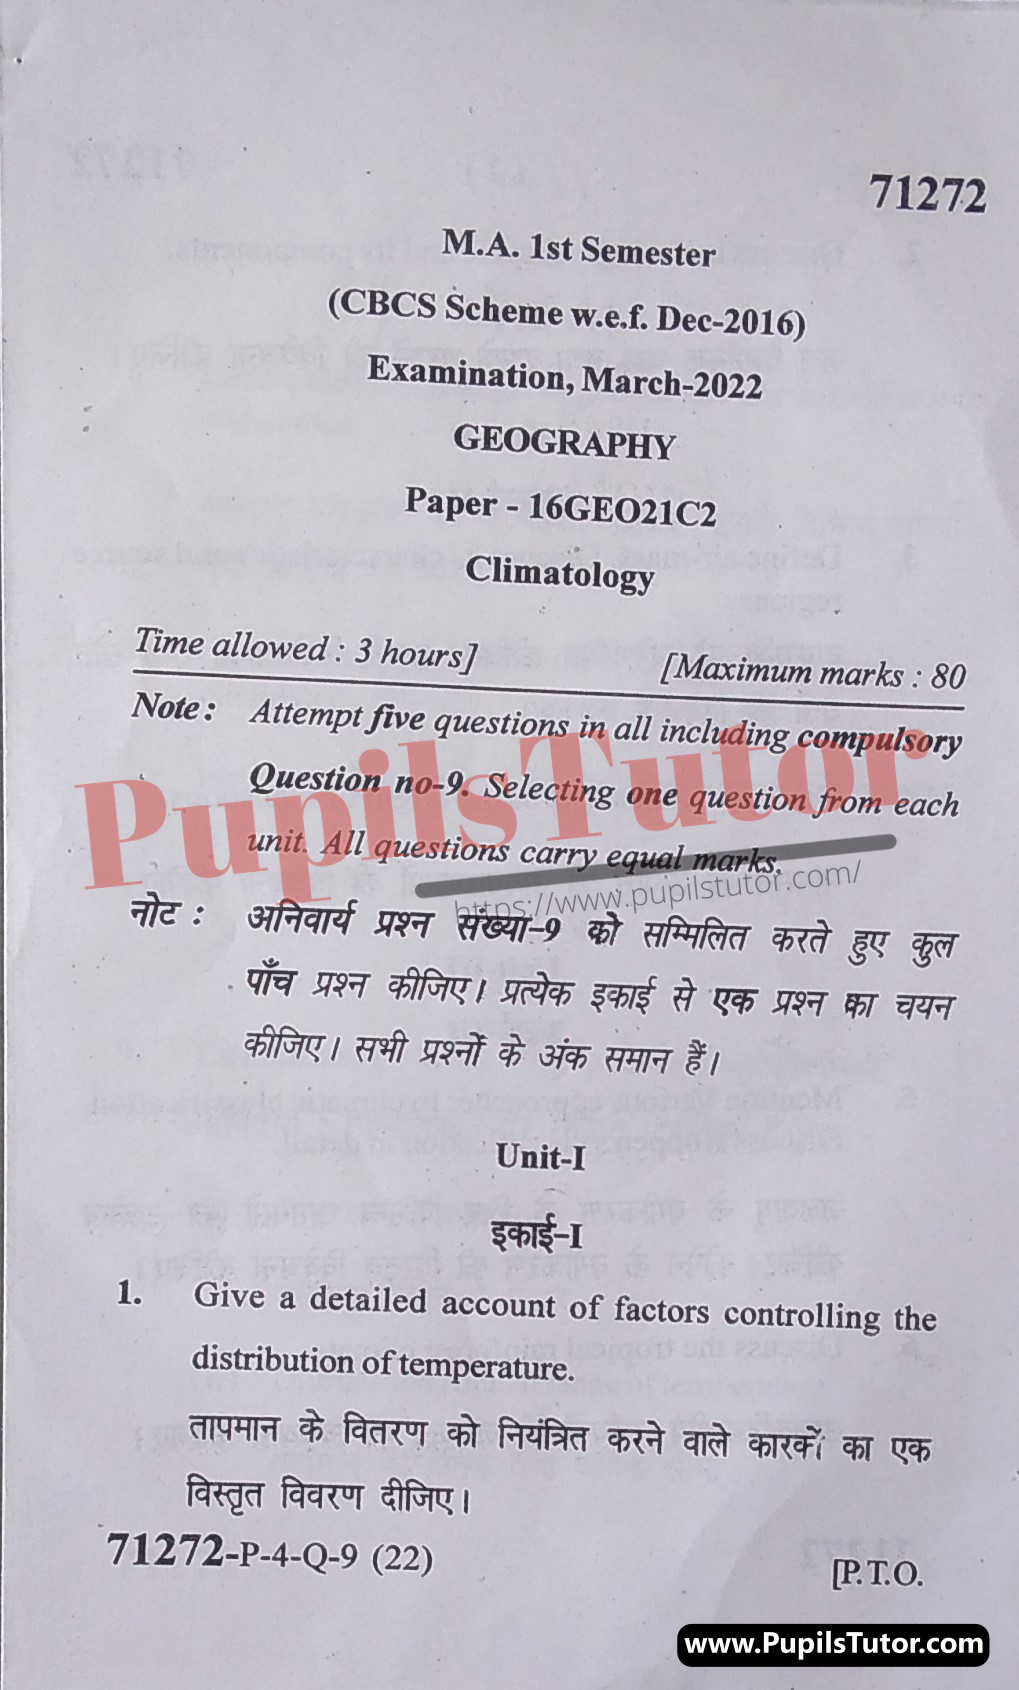 MDU (Maharshi Dayanand University, Rohtak Haryana) MA Geography CBCS Scheme First Semester Previous Year Climatology Question Paper For February, 2022 Exam (Question Paper Page 1) - pupilstutor.com